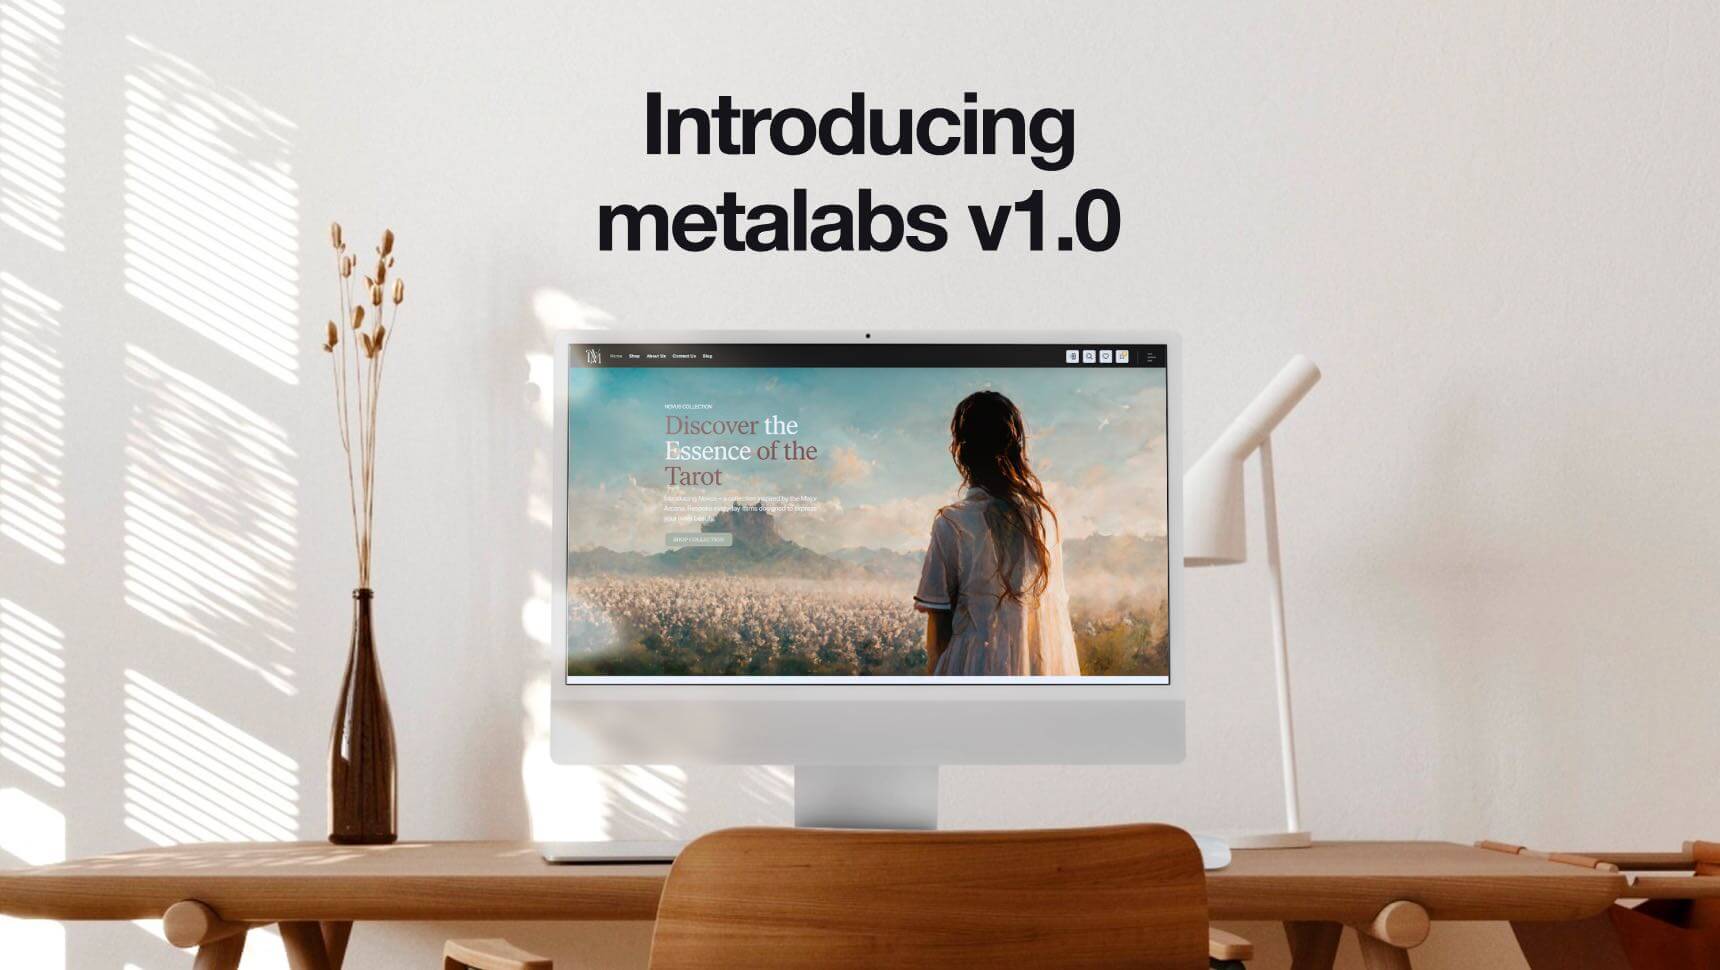 Introducing metallabs v10 - a simple and minimalist design that pushes limits.